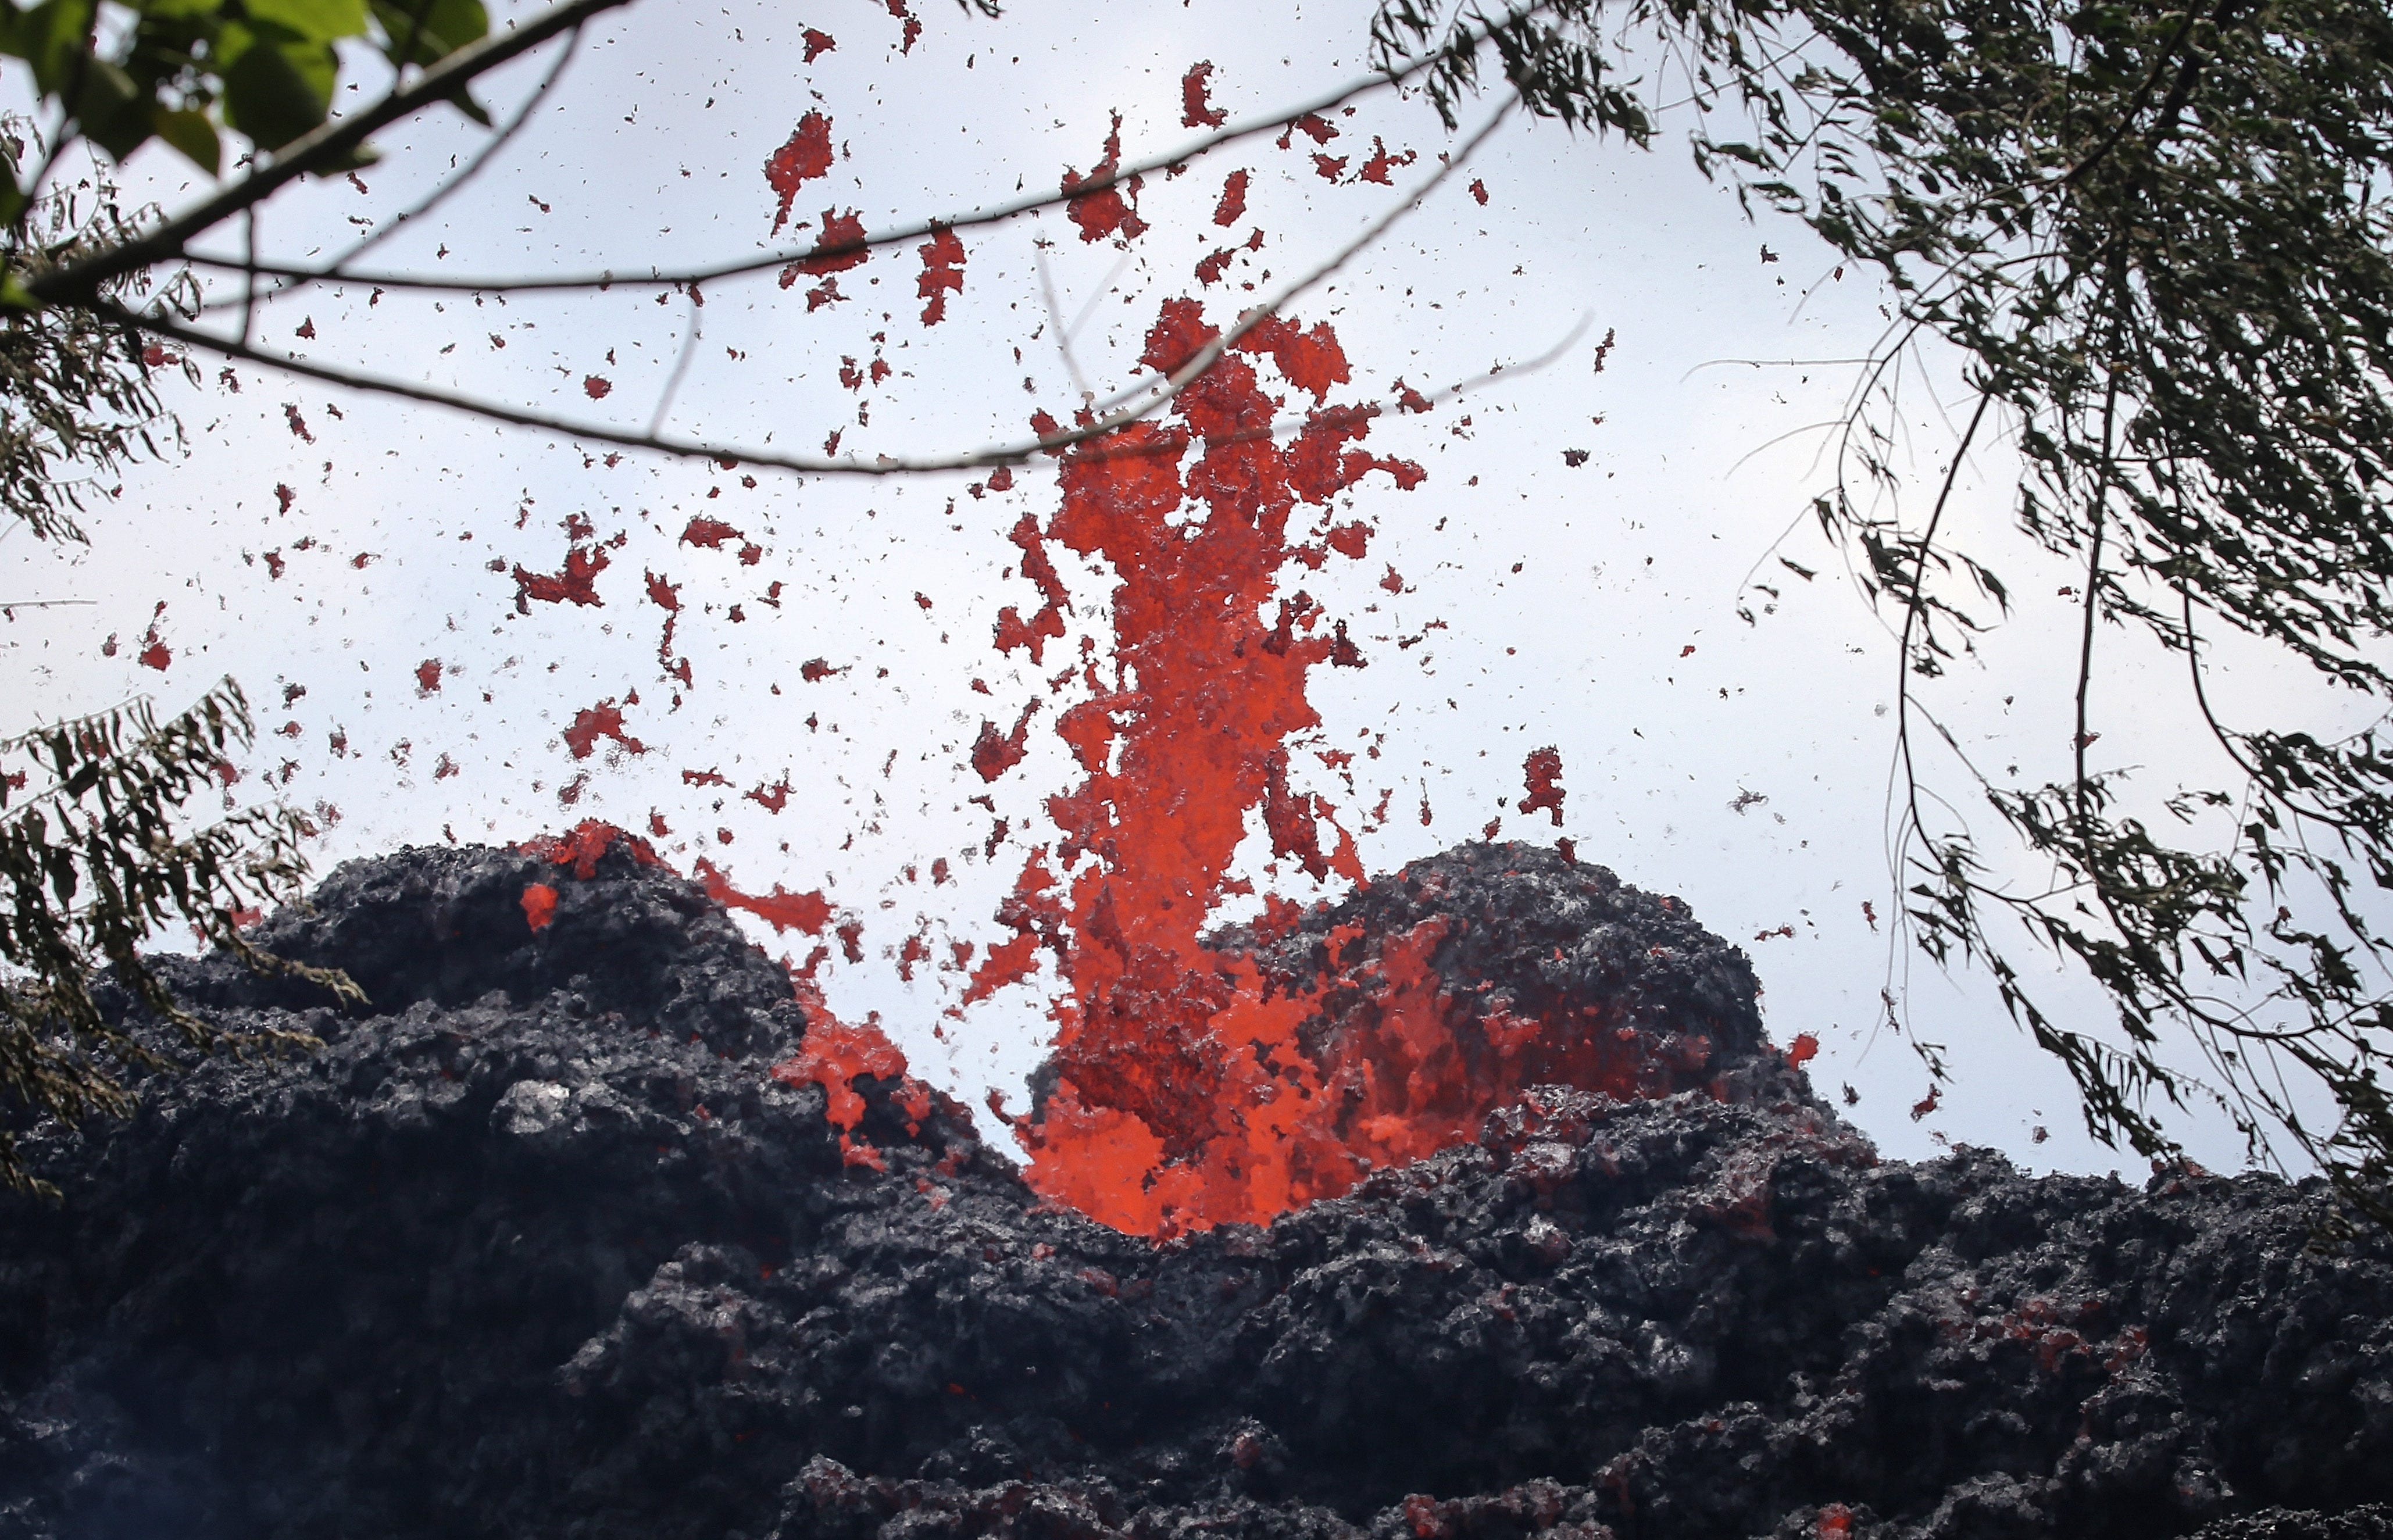 A lava fissure erupts in the aftermath of eruptions from the Kilauea volcano on Hawaii's Big Island, on May 12, 2018 in Pahoa, Hawaii. The U.S. Geological Survey said a recent lowering of the lava lake at the volcano's Halemaumau crater Ã'has raised 